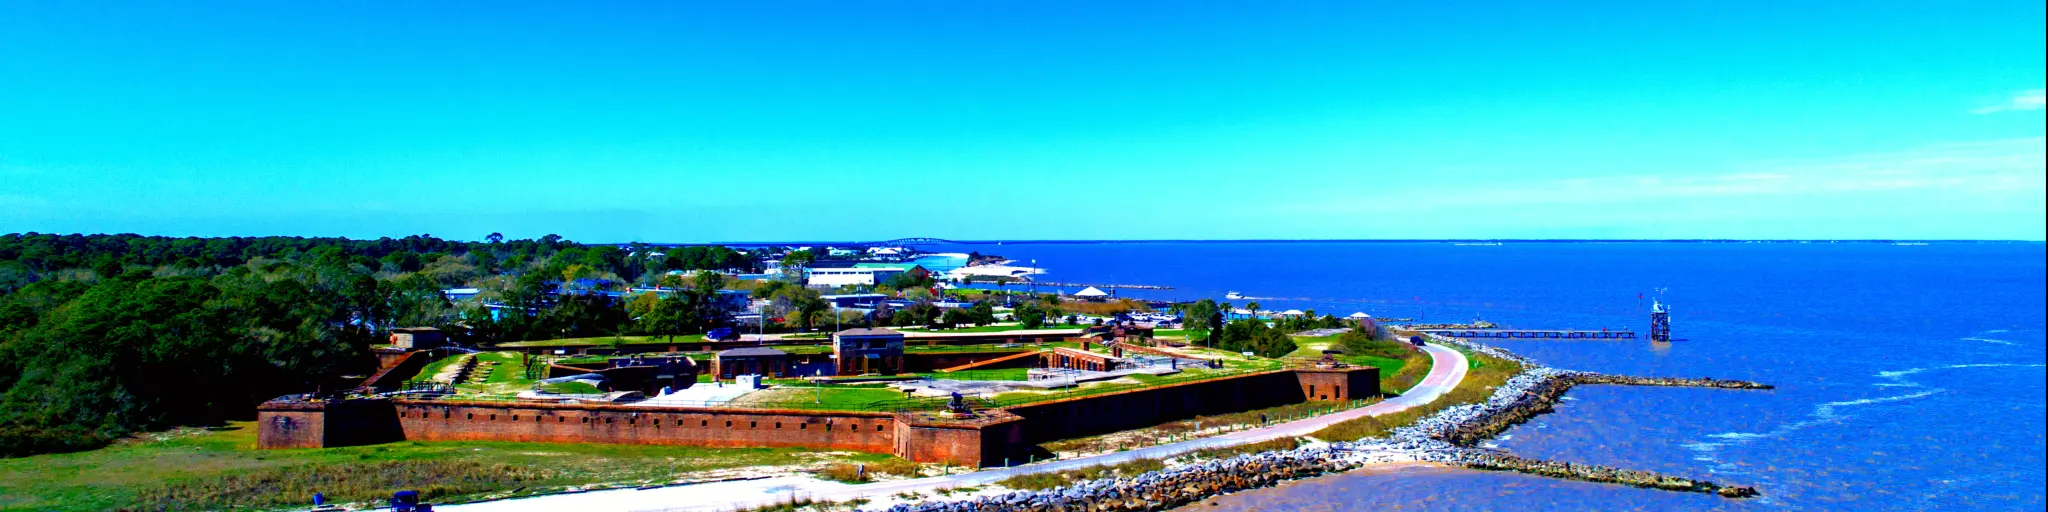 A panoramic view of a pentagon-shaped Fort Gaines along Mobile Bay in Dauphin Island, Alabama, USA, in fair weather